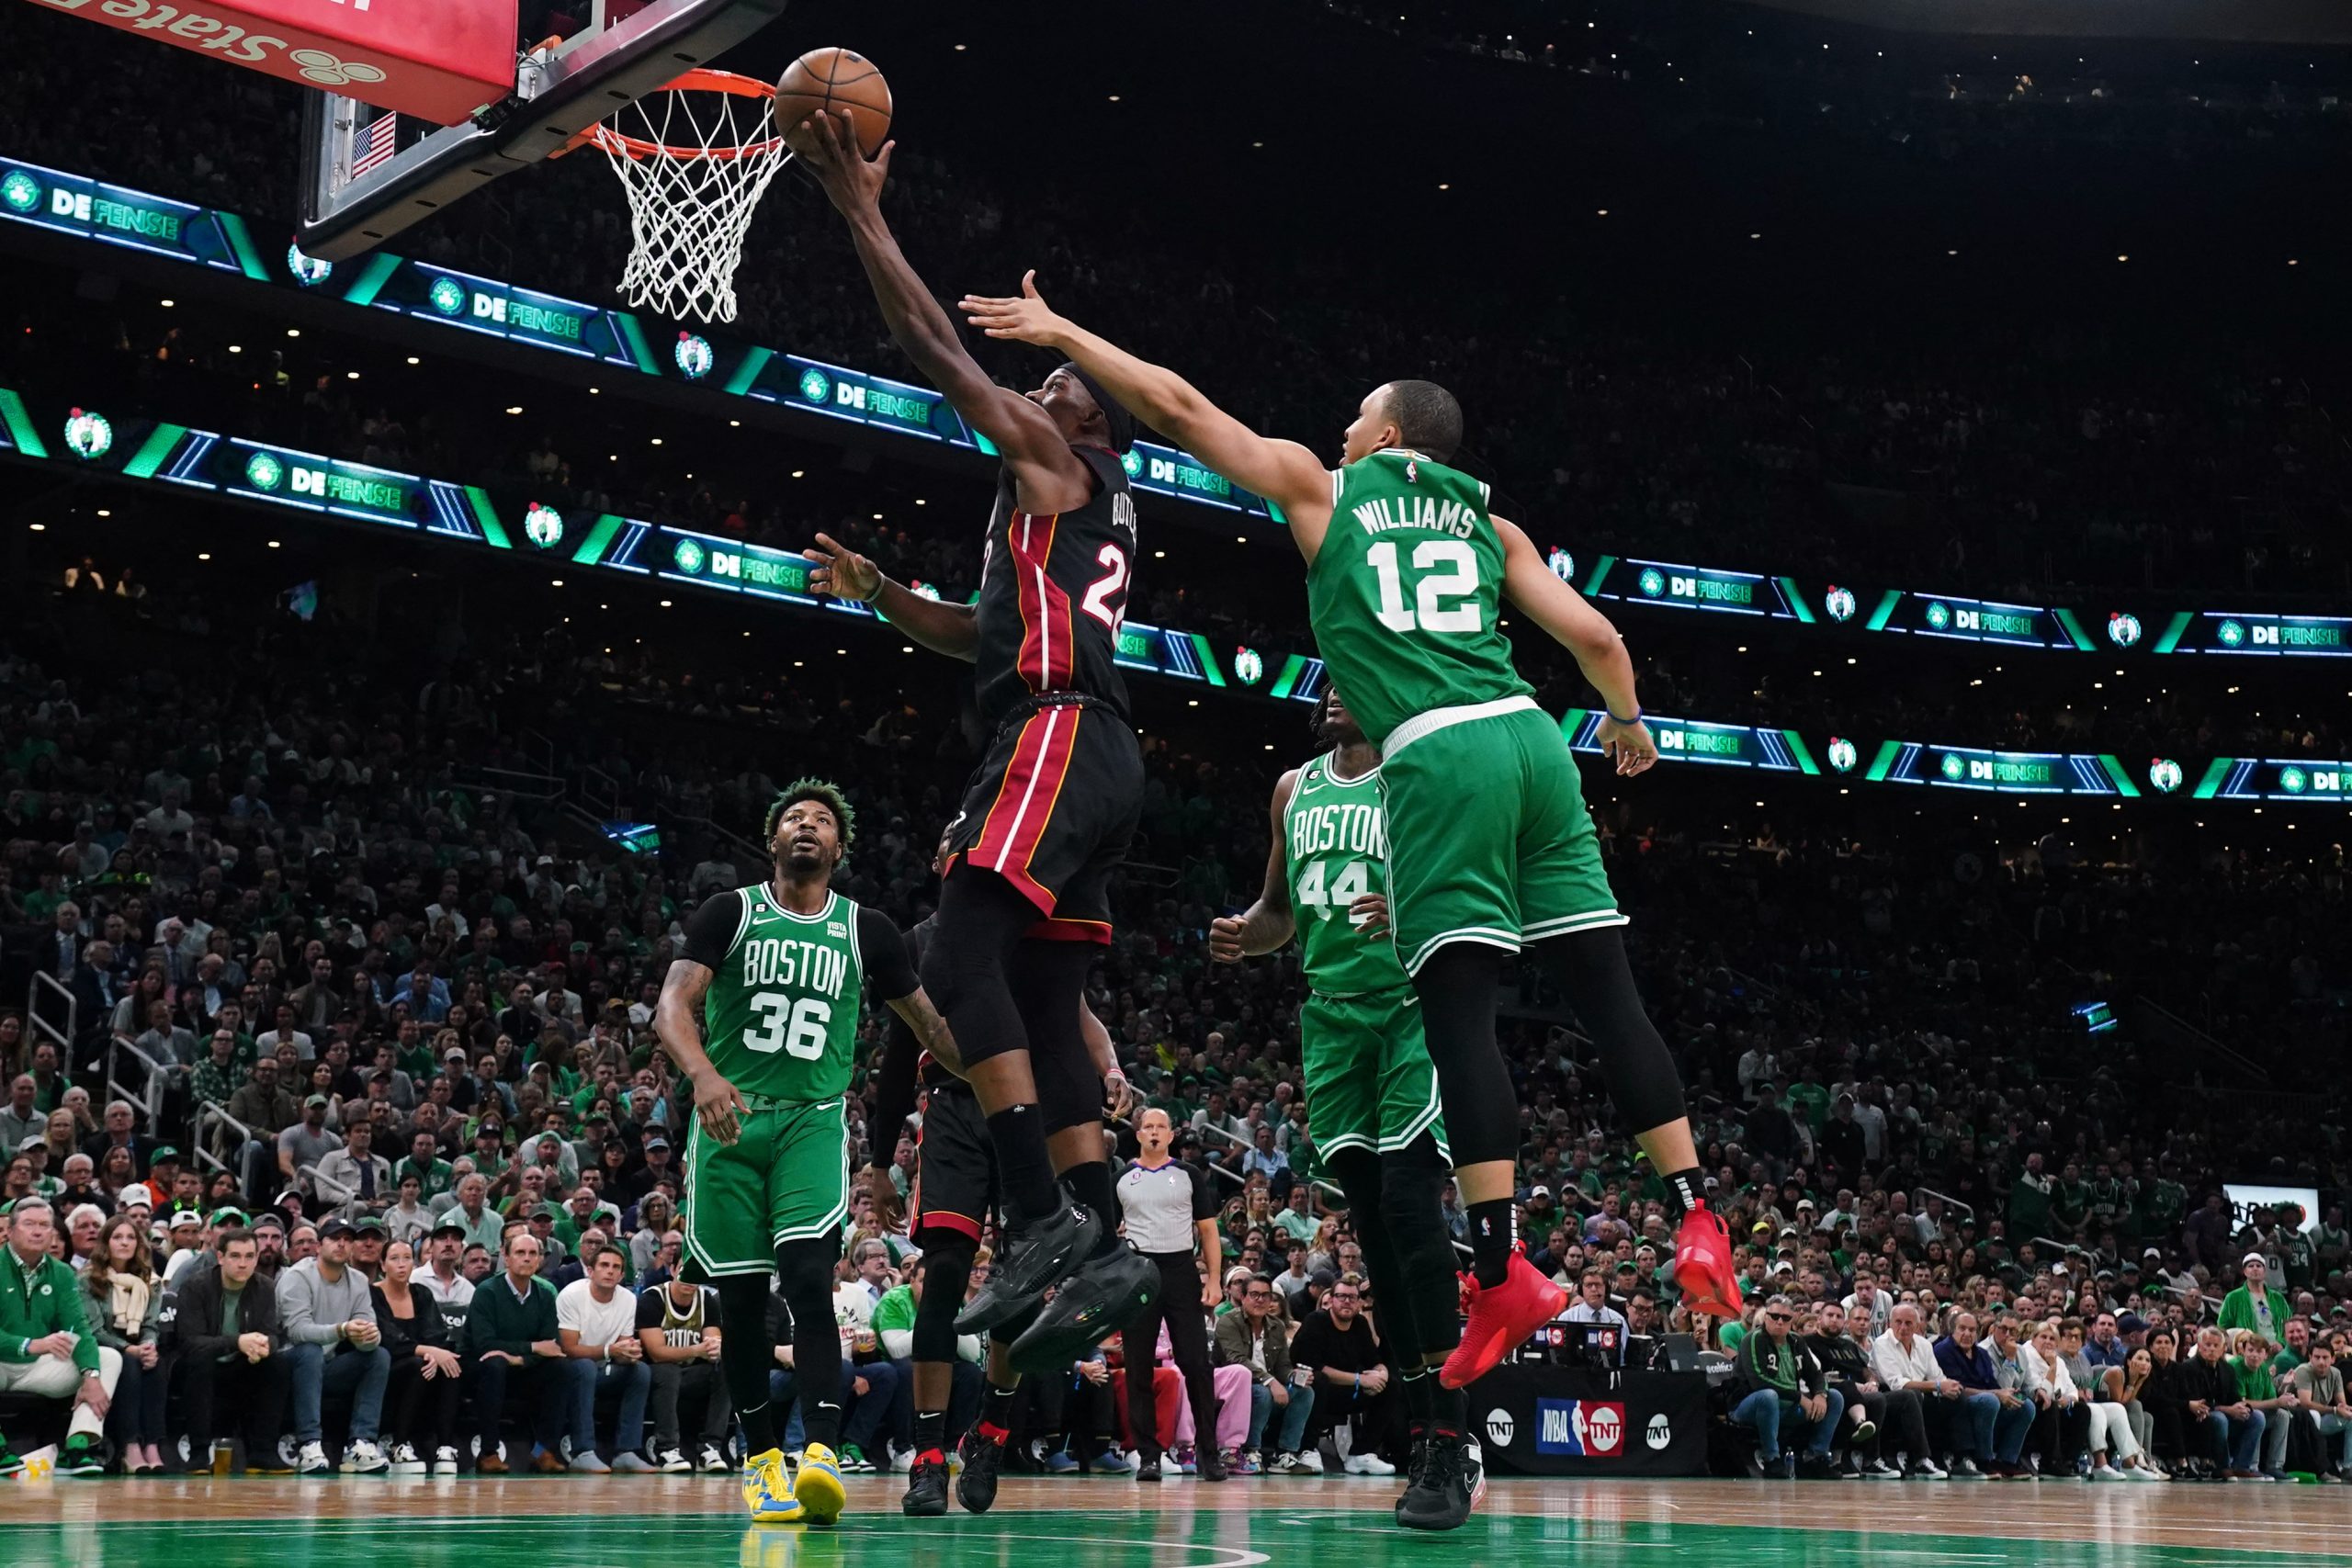 May 29, 2023; Boston, Massachusetts, USA; Miami Heat forward Jimmy Butler (22) shoots against Boston Celtics forward Grant Williams (12) in the first quarter during game seven of the Eastern Conference Finals for the 2023 NBA playoffs at TD Garden. Mandatory Credit: David Butler II-USA TODAY Sports Photo: David Butler II/REUTERS